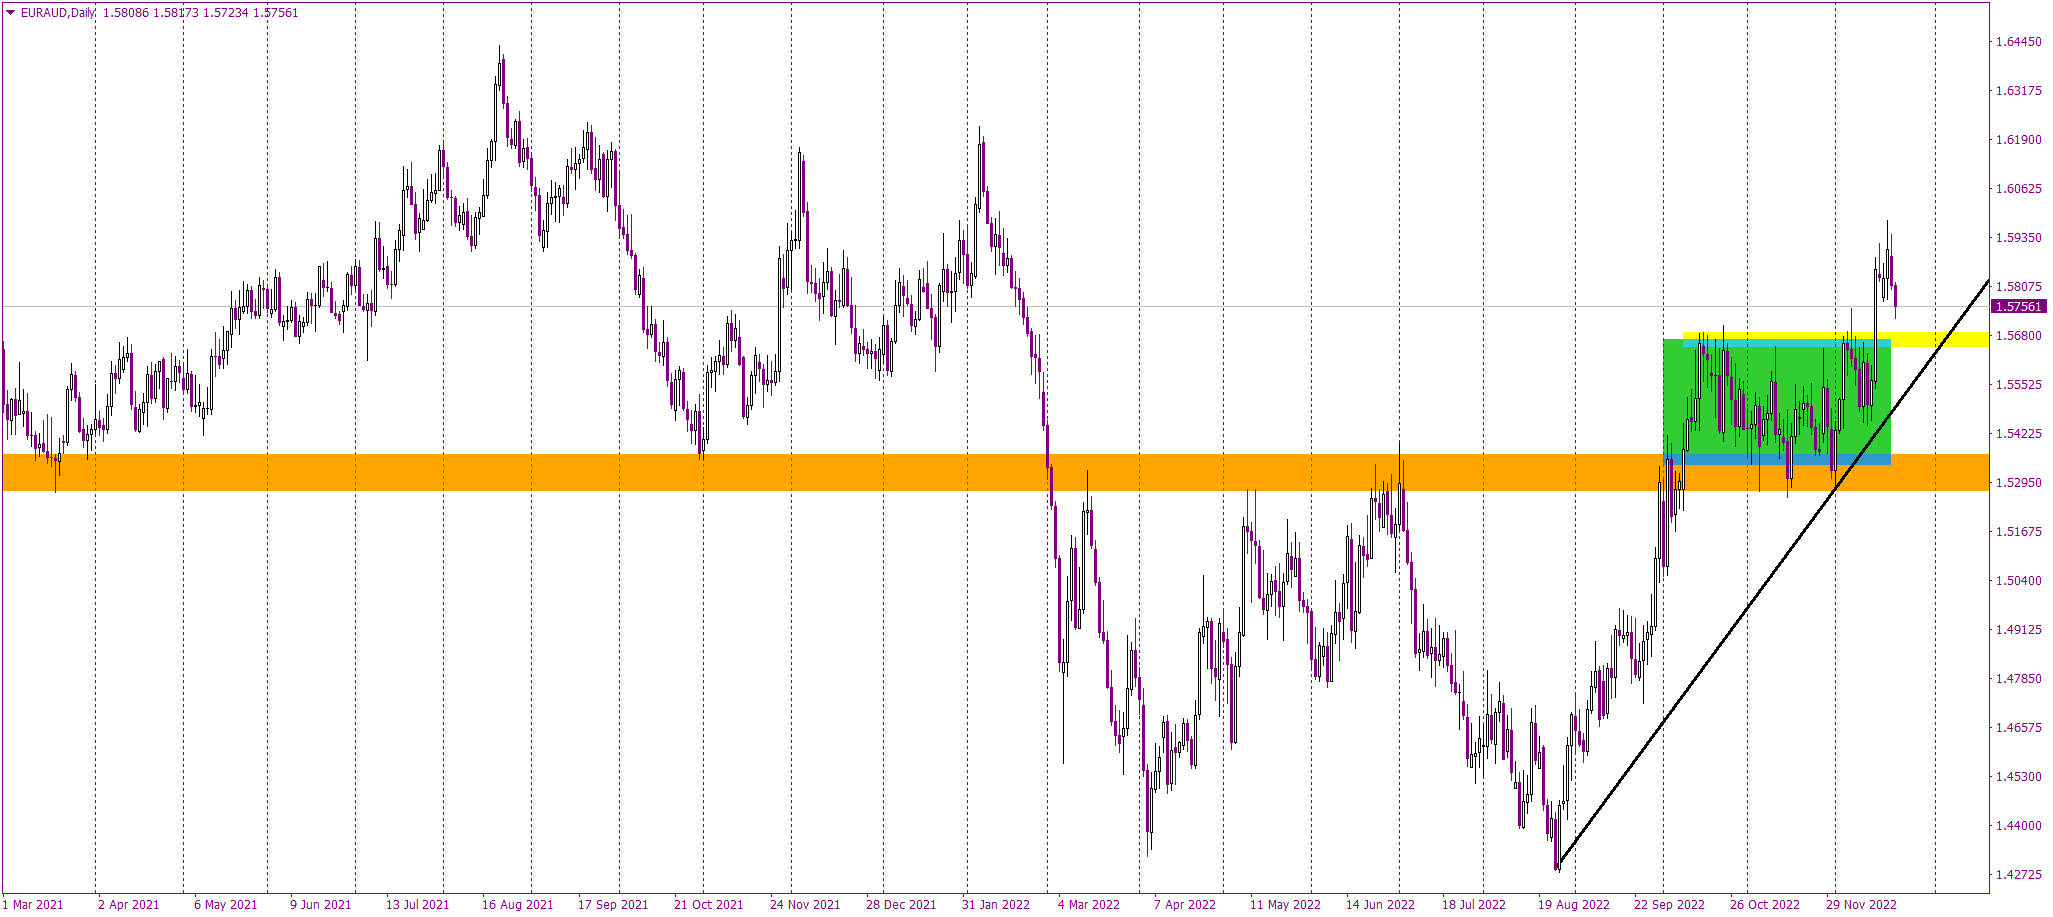 EURAUD should soon test the 1.568 as the closest support